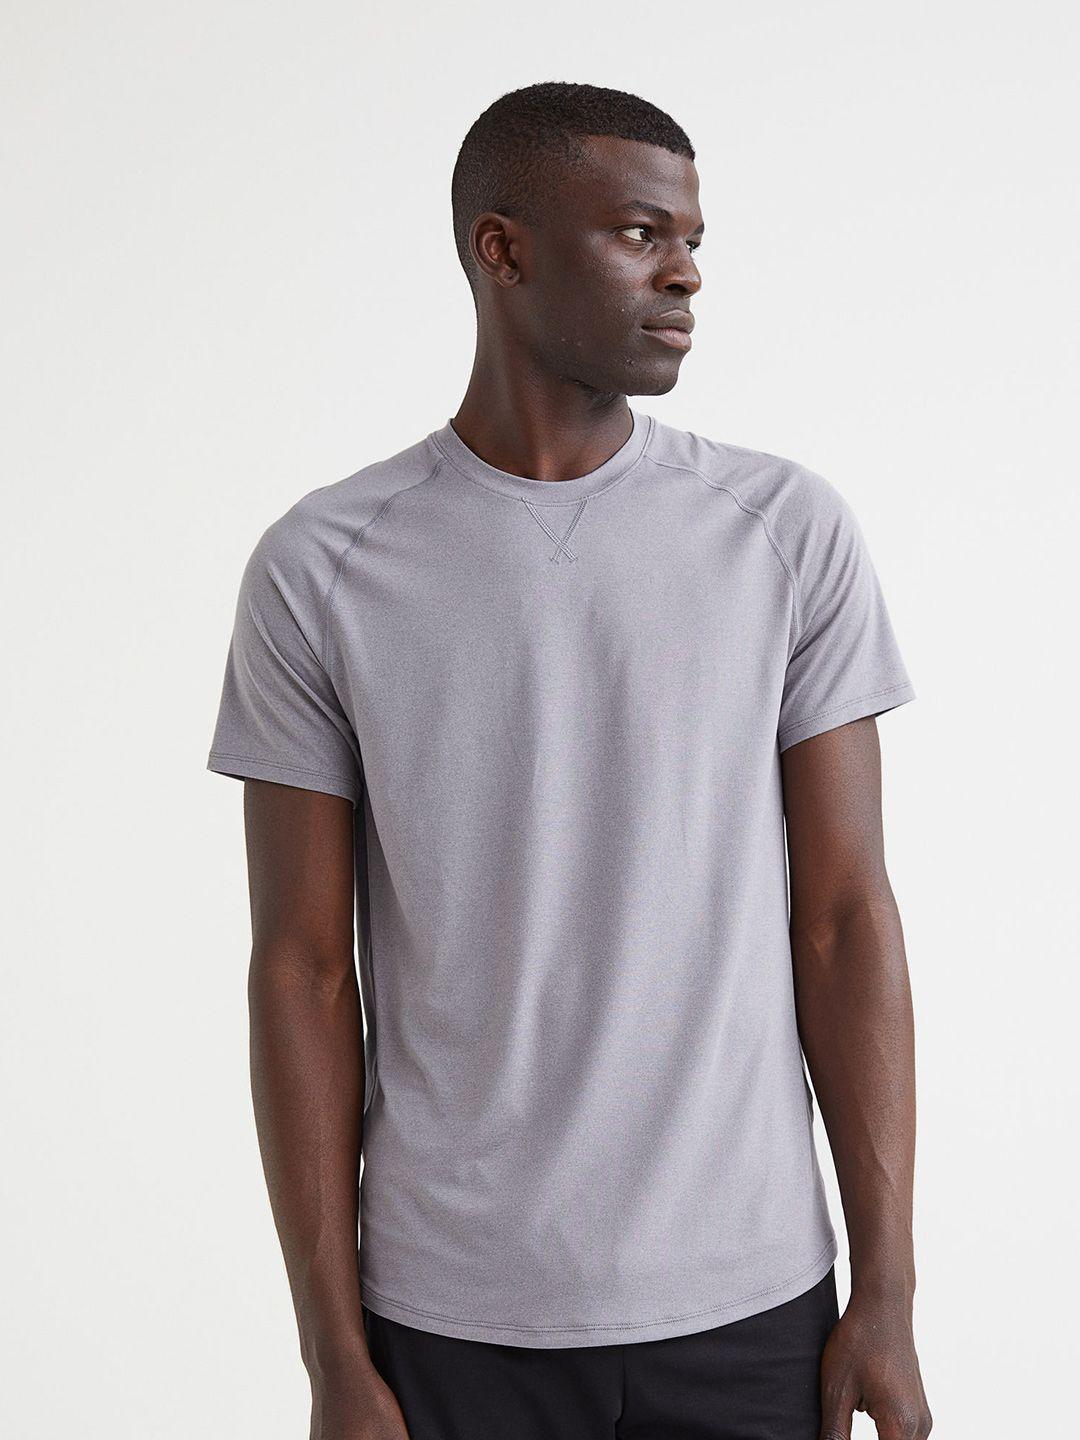 h&m men grey solid loose fit sports top